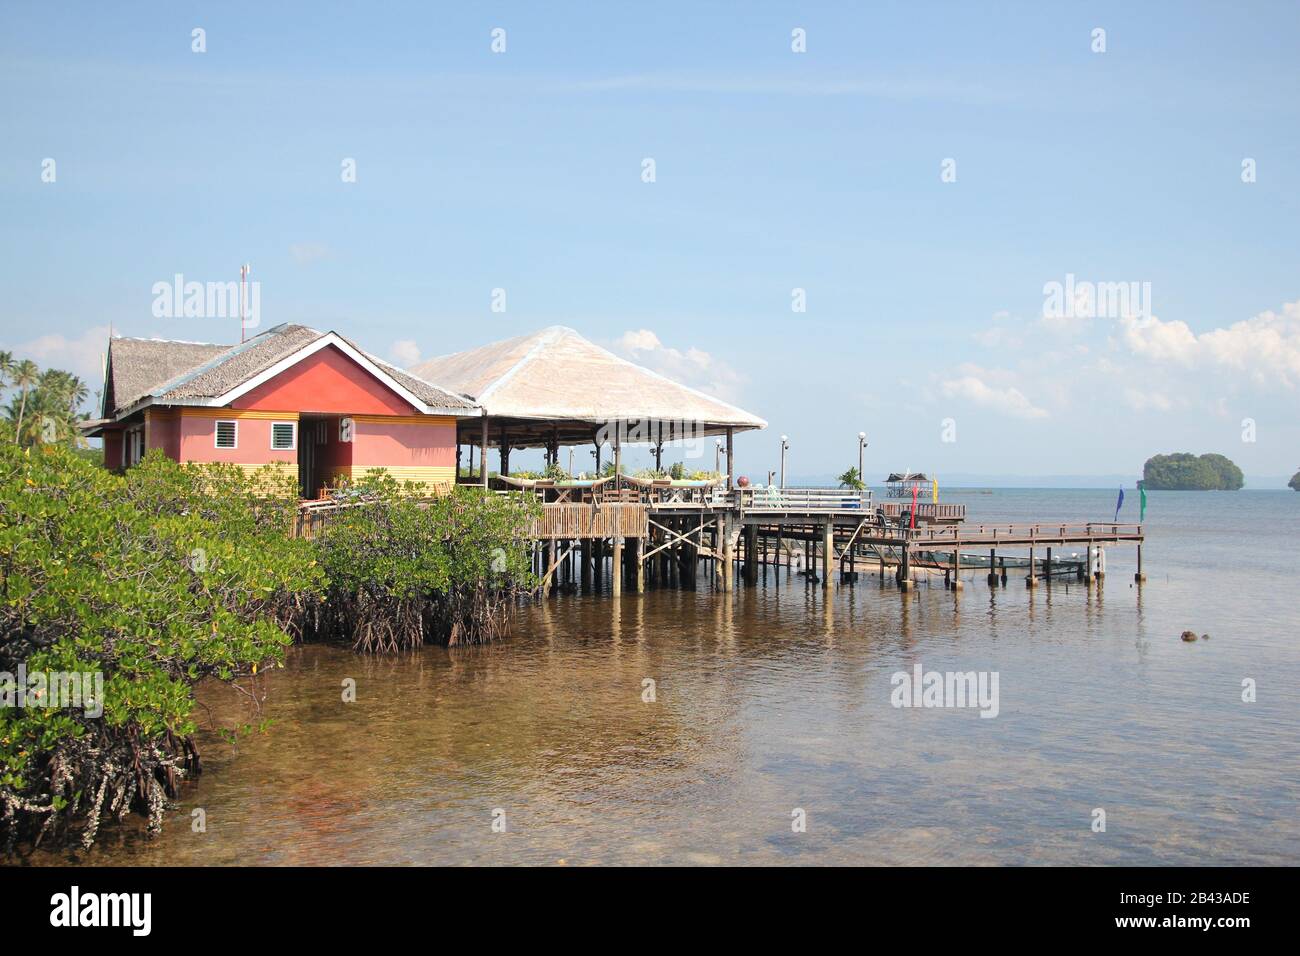 Wooden cottages on stilts at Surigao del Sur, Philippines. Stock Photo